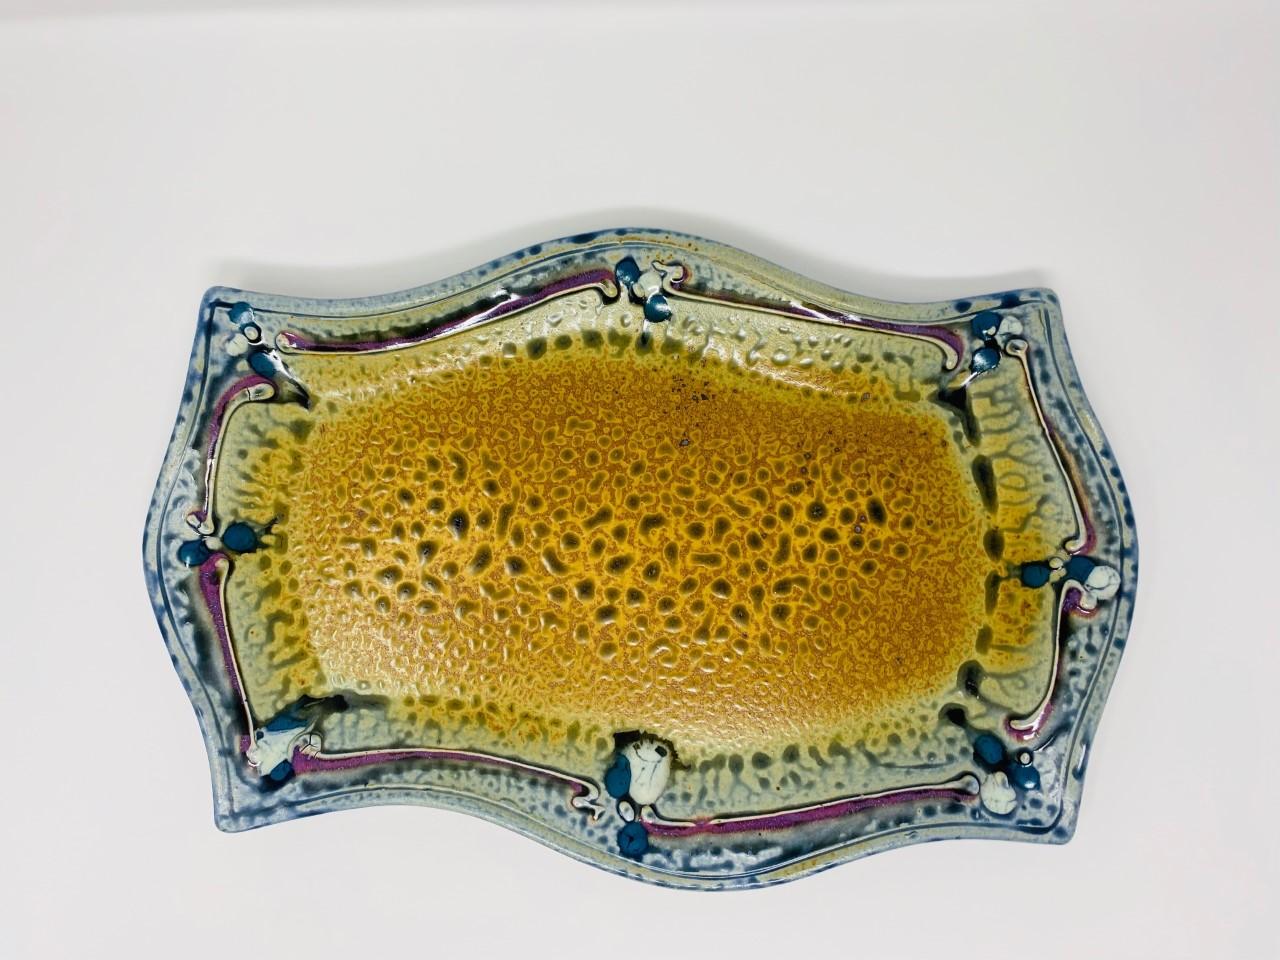 Beautifully created and in excellent condition vintage ceramic platter. The finish on this platter evokes an optic illusion of reptile skin in the center as it is beautifully framed by hues of blue, purple and beige glaze. This piece is 15.5” wide